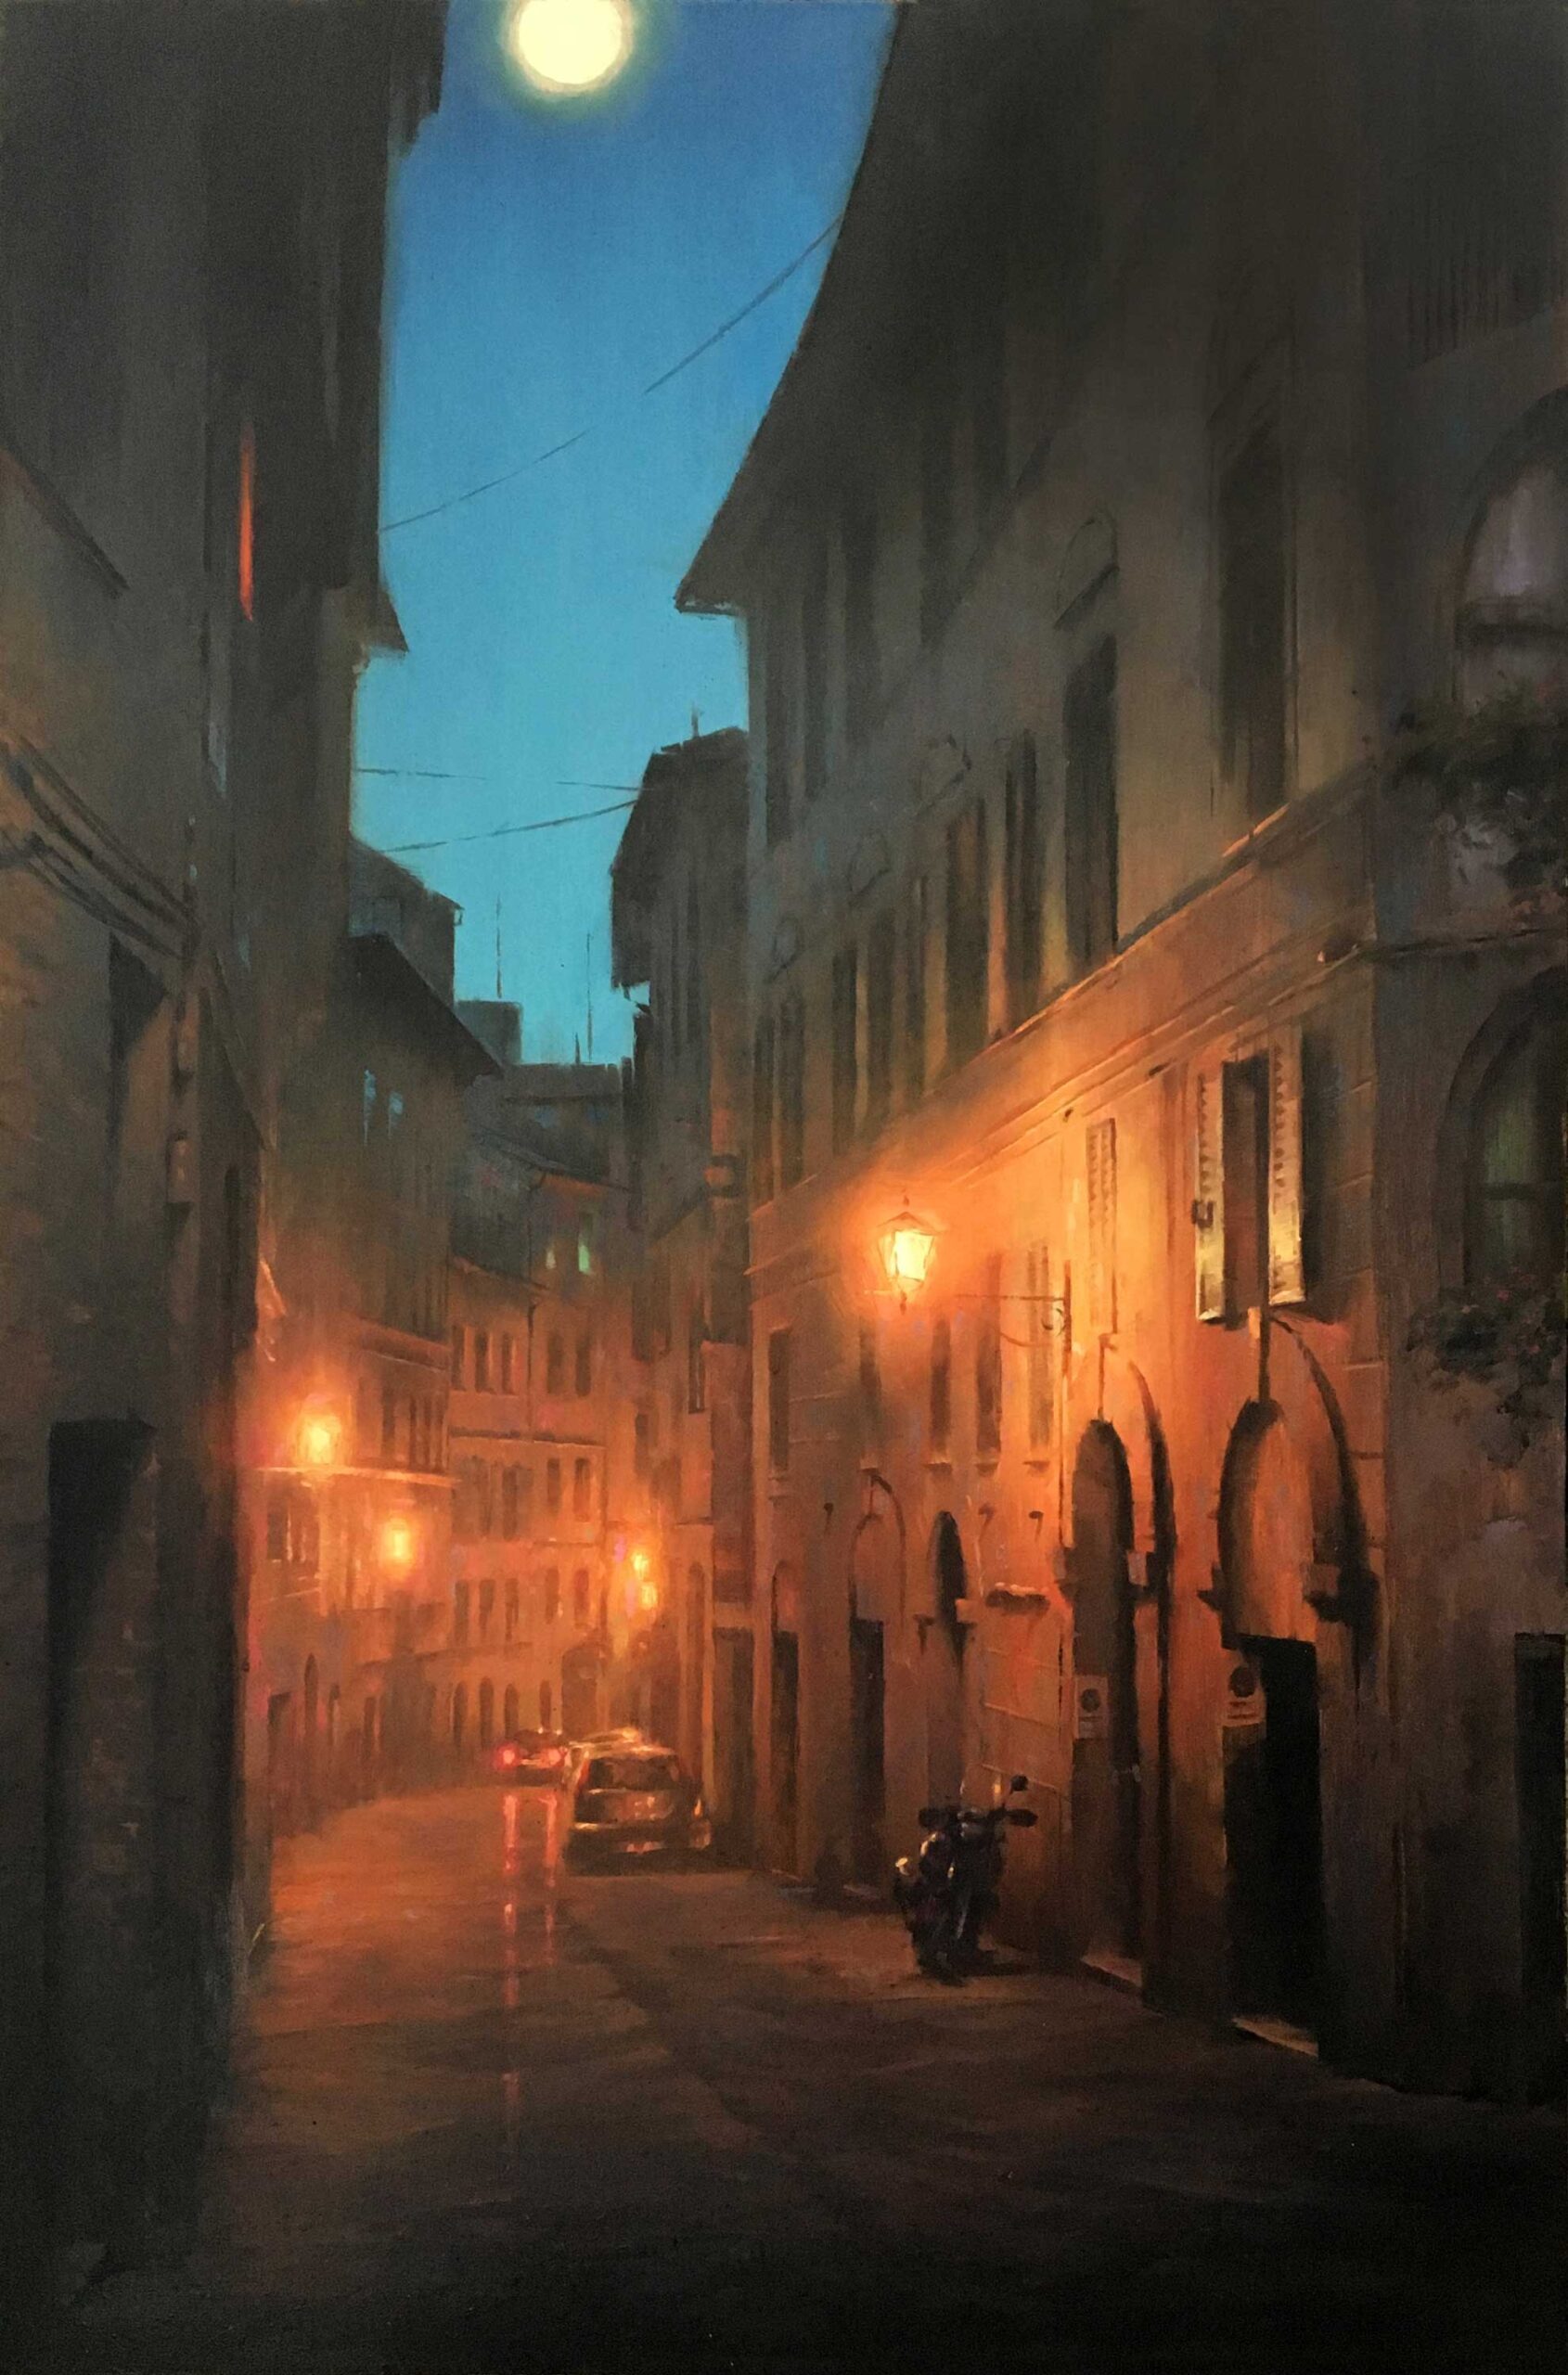 Gavin Glakas, “An Appointment in Siena,” oil on panel, 16” x 24”